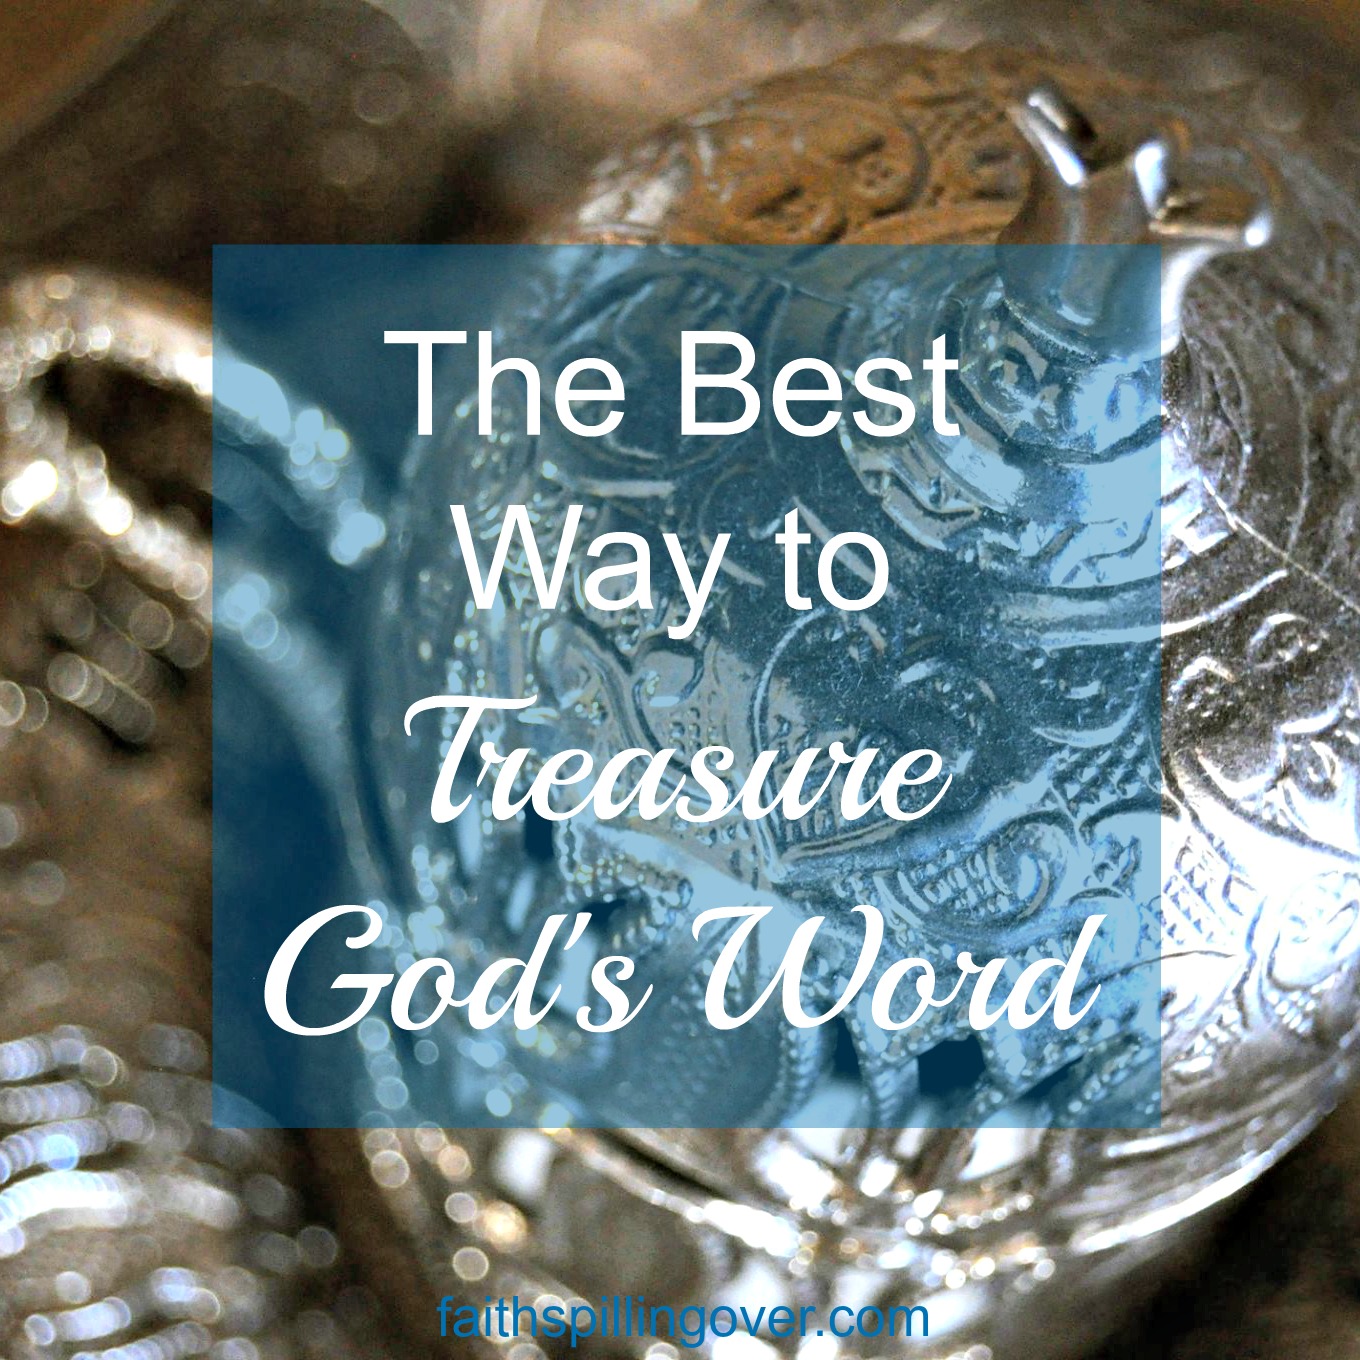 What better way to treasure God’s words than to memorize them. Just 2 verses a month add up to 24 verses a year. That's a powerful deposit of treasure into our hearts.